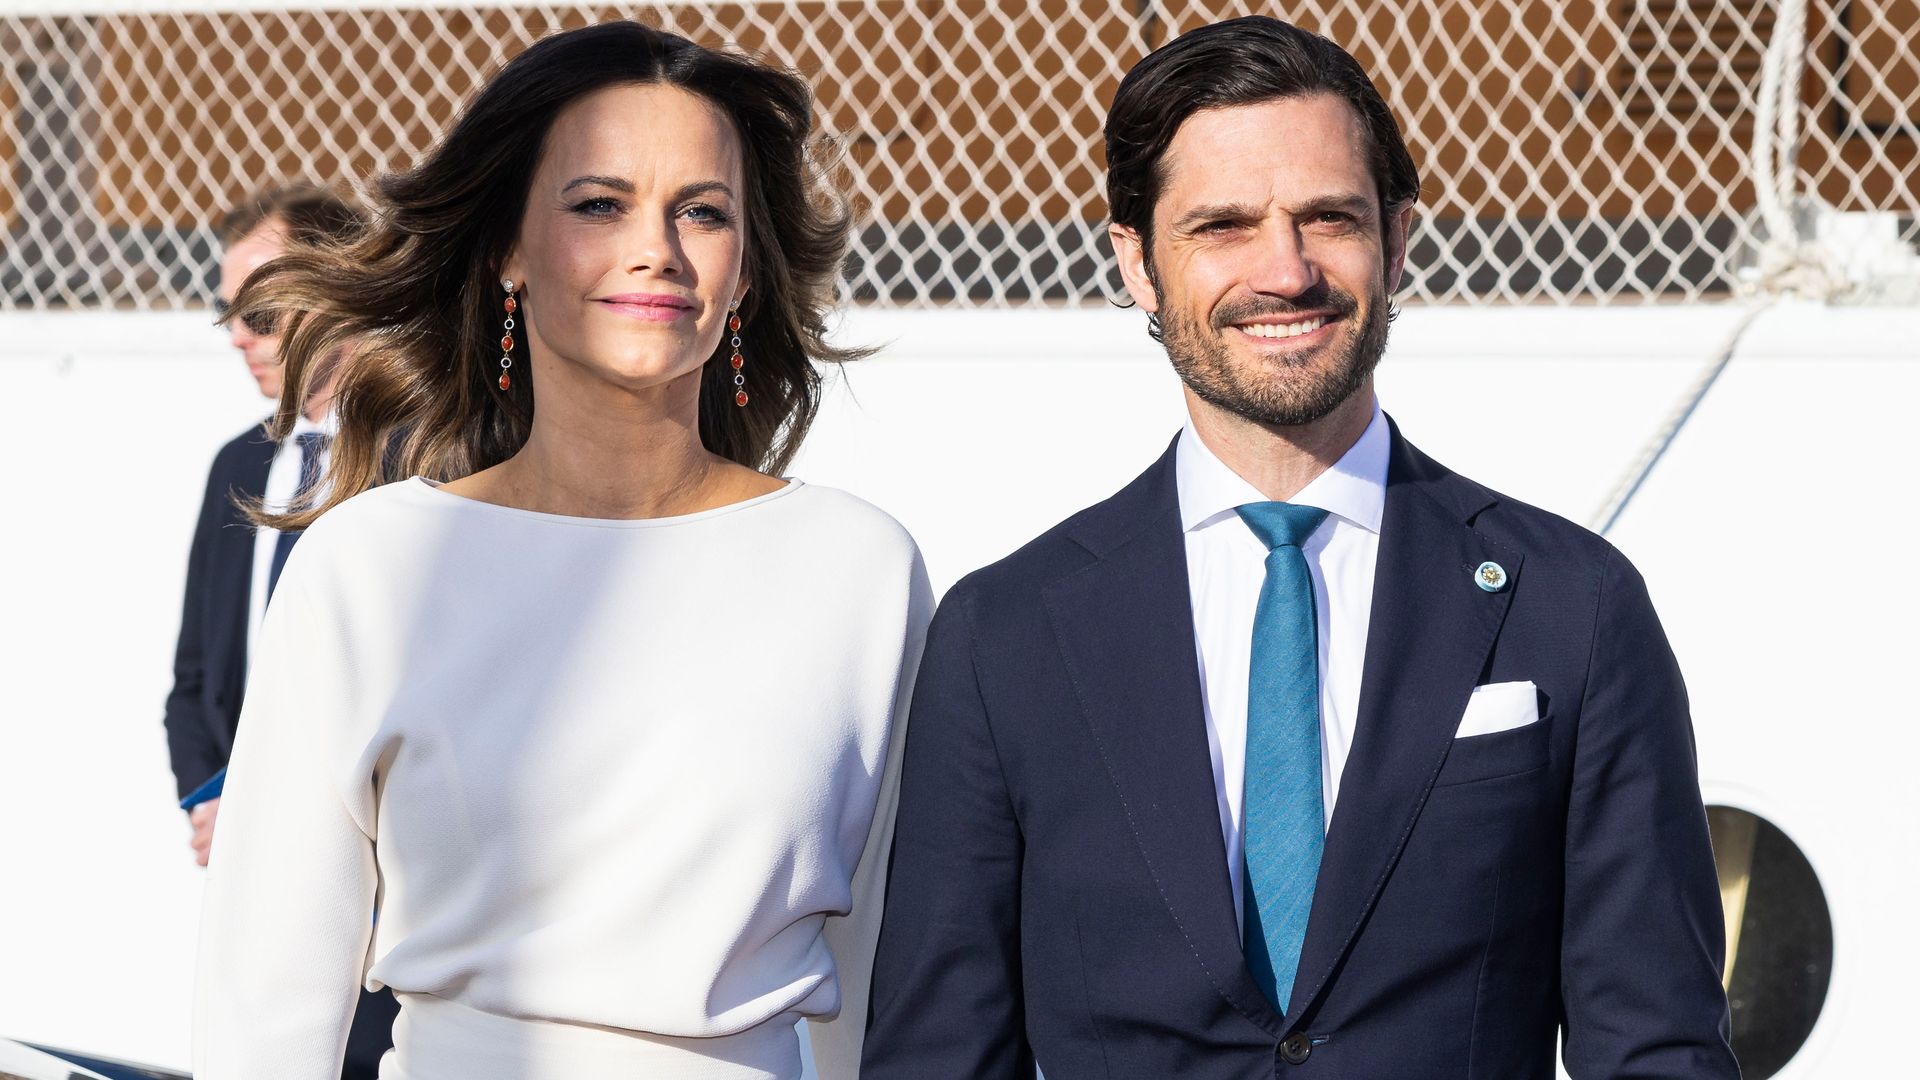 STOCKHOLM, SWEDEN - MAY 7: Princess Sofia and Prince Carl Philip, of Sweden, arrive at the royal yacht, Dannebrog, on May 7, 2024 in Stockholm, Sweden. The King and Queen of Denmark are on a two day official state visit to Sweden, marking their first state visit since the King's ascension. (Photo by Michael Campanella/Getty Images)